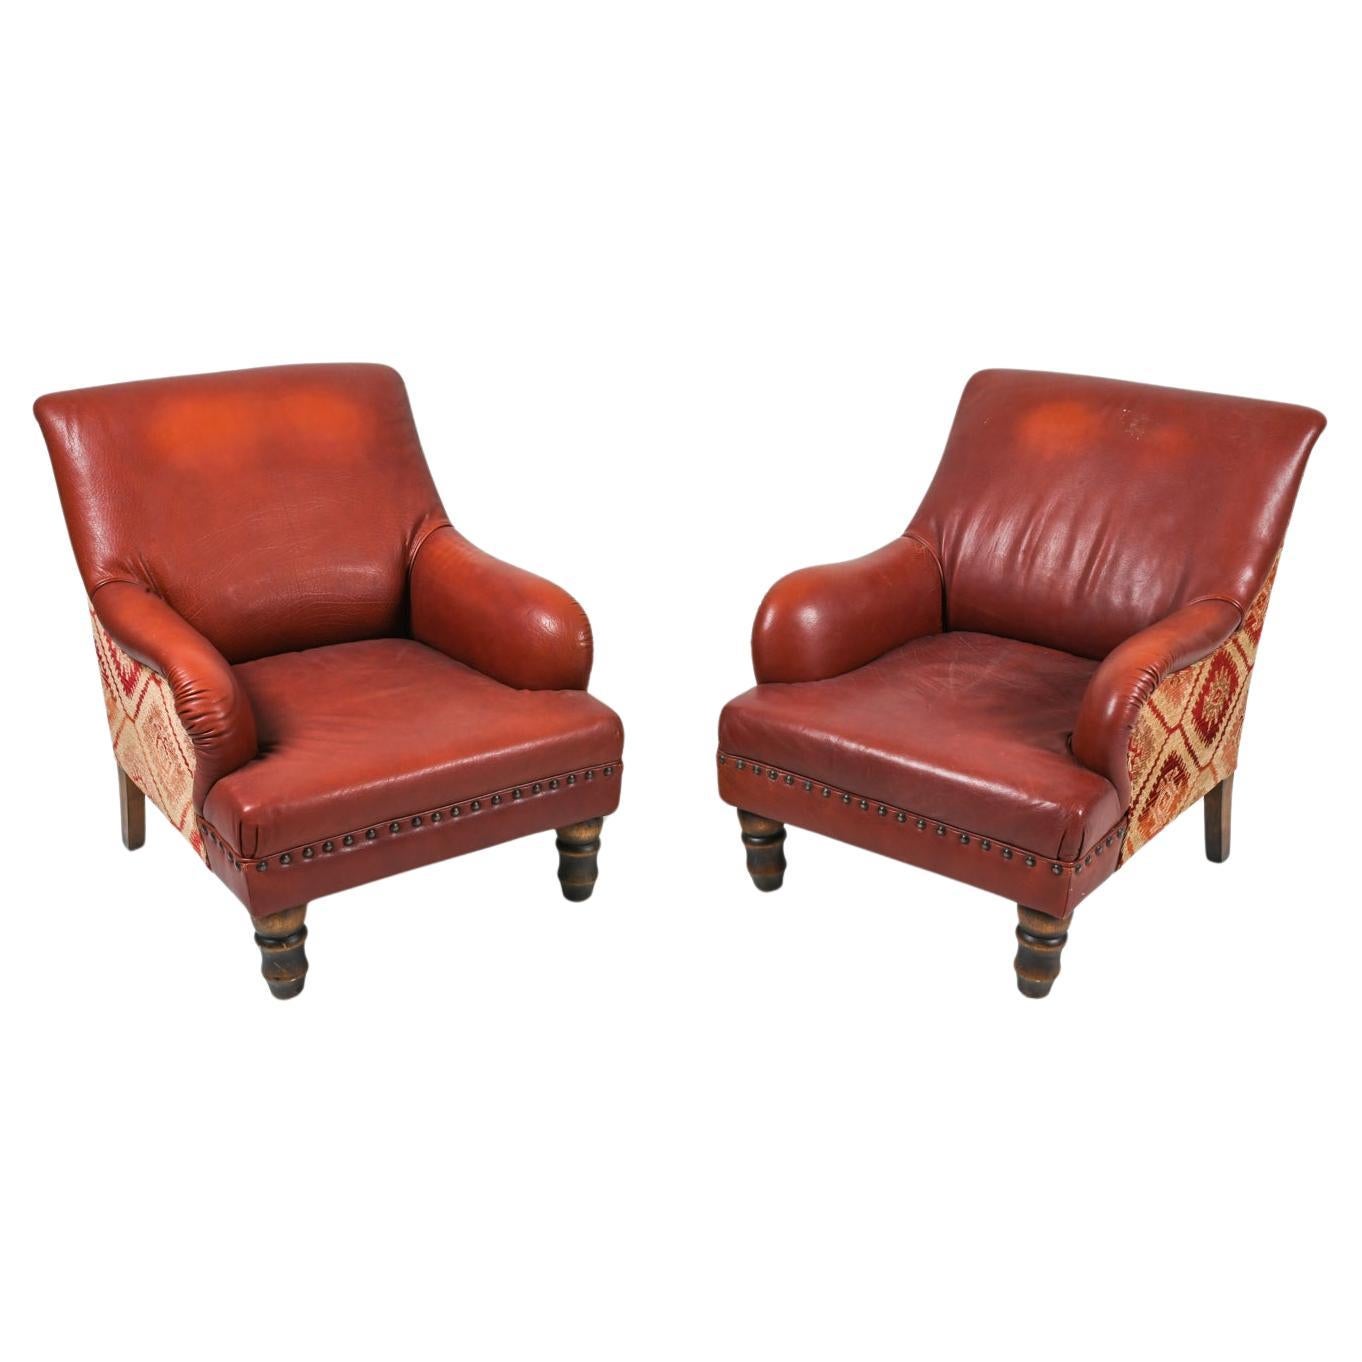 Pair of Roche Bobois Leather & Kilim Lounge Chairs For Sale